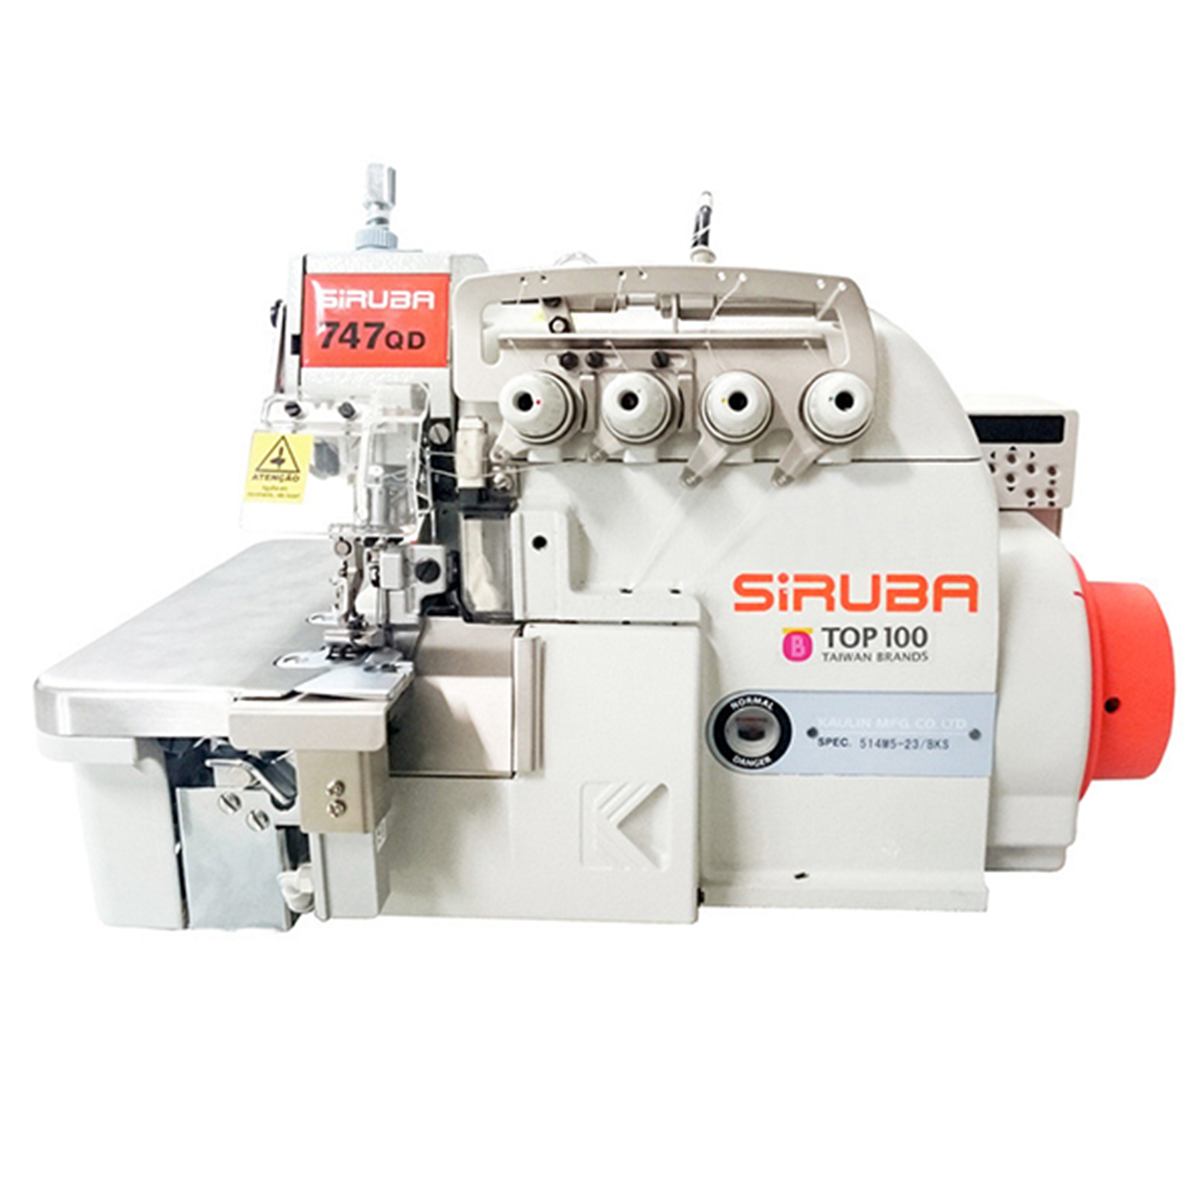 SIRUBA 747QD-514M5-23/BKS-1 4 Direct Drive Thread Overlock with Semi-Auto Backlatch Industrial Sewing Machine Assembled with Servo Motor, Fully Submerged Table Setup